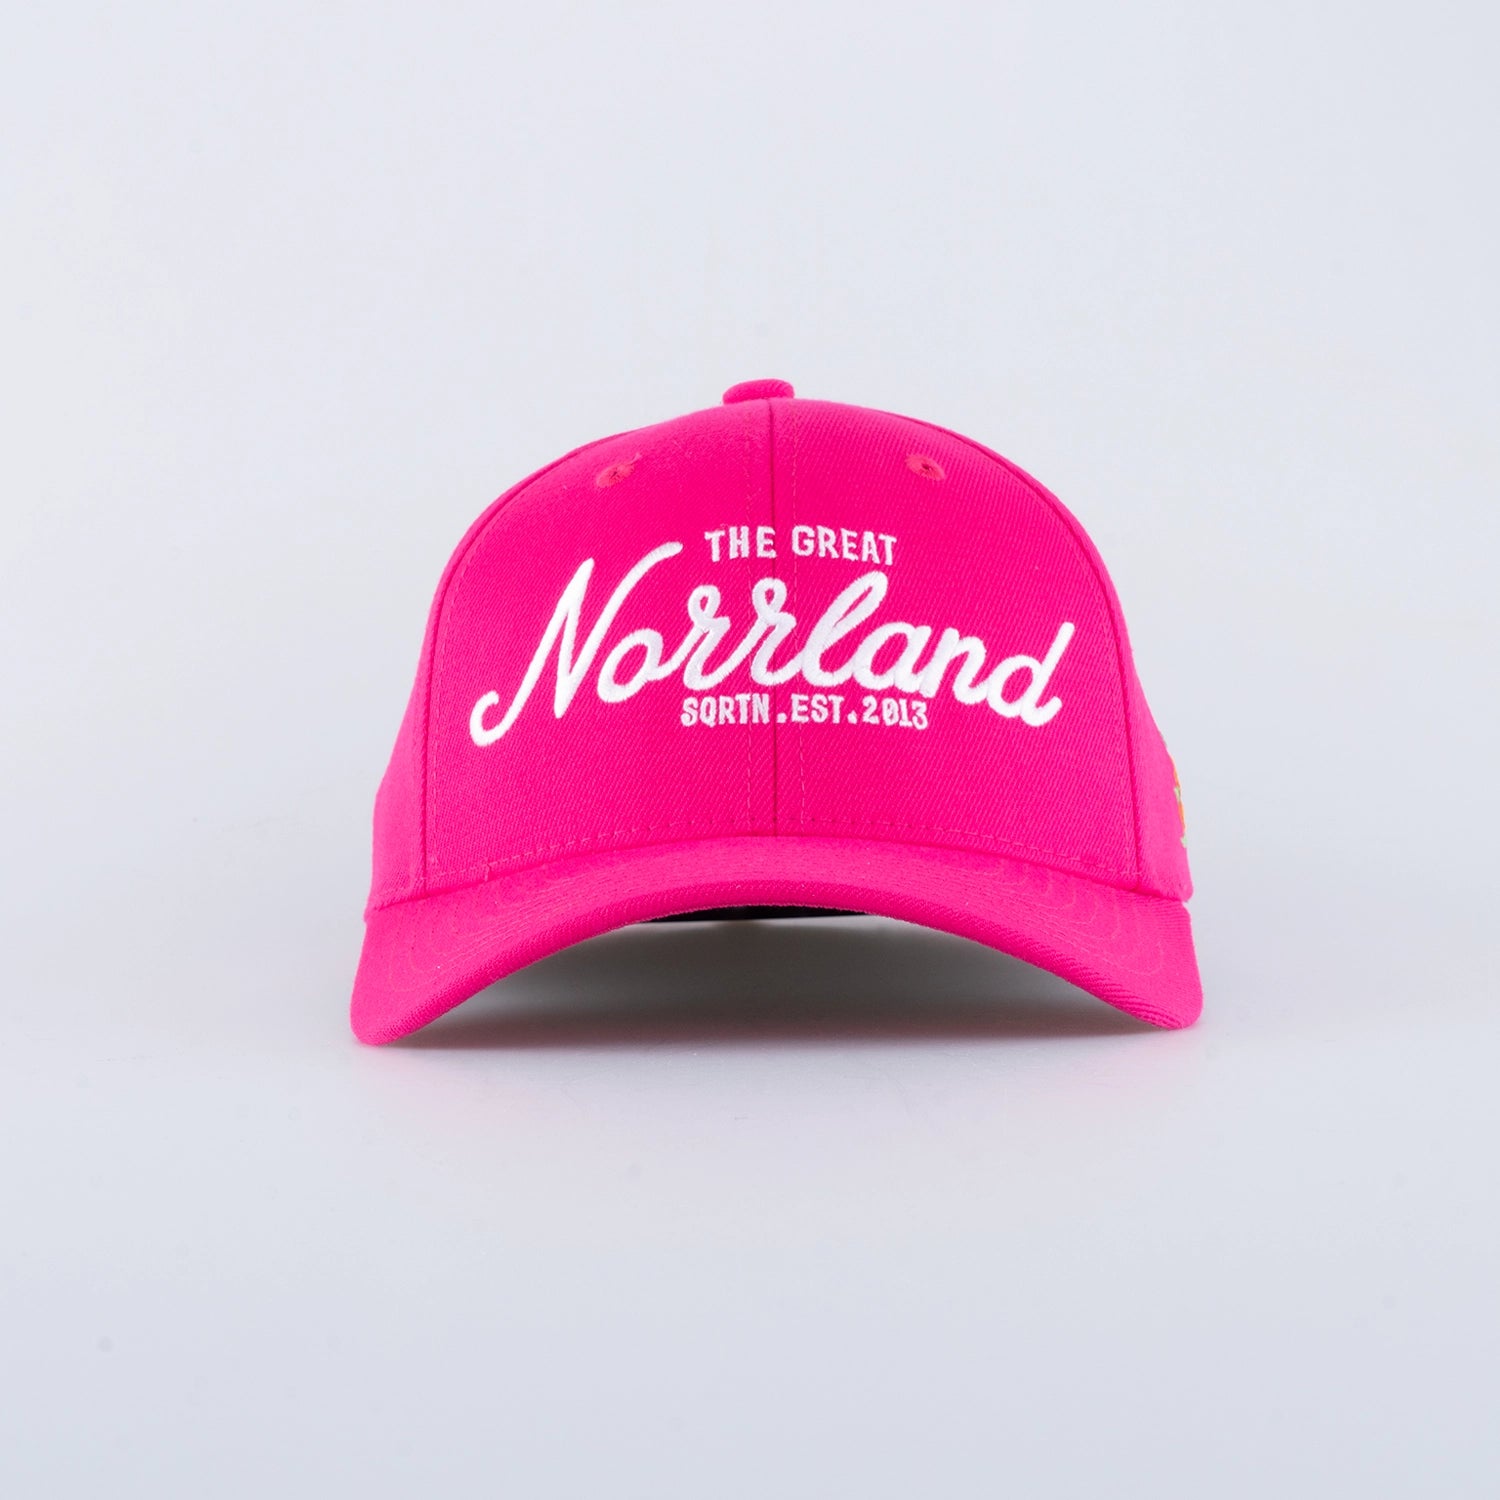 GREAT NORRLAND KEPS - HOOKED HOT PINK